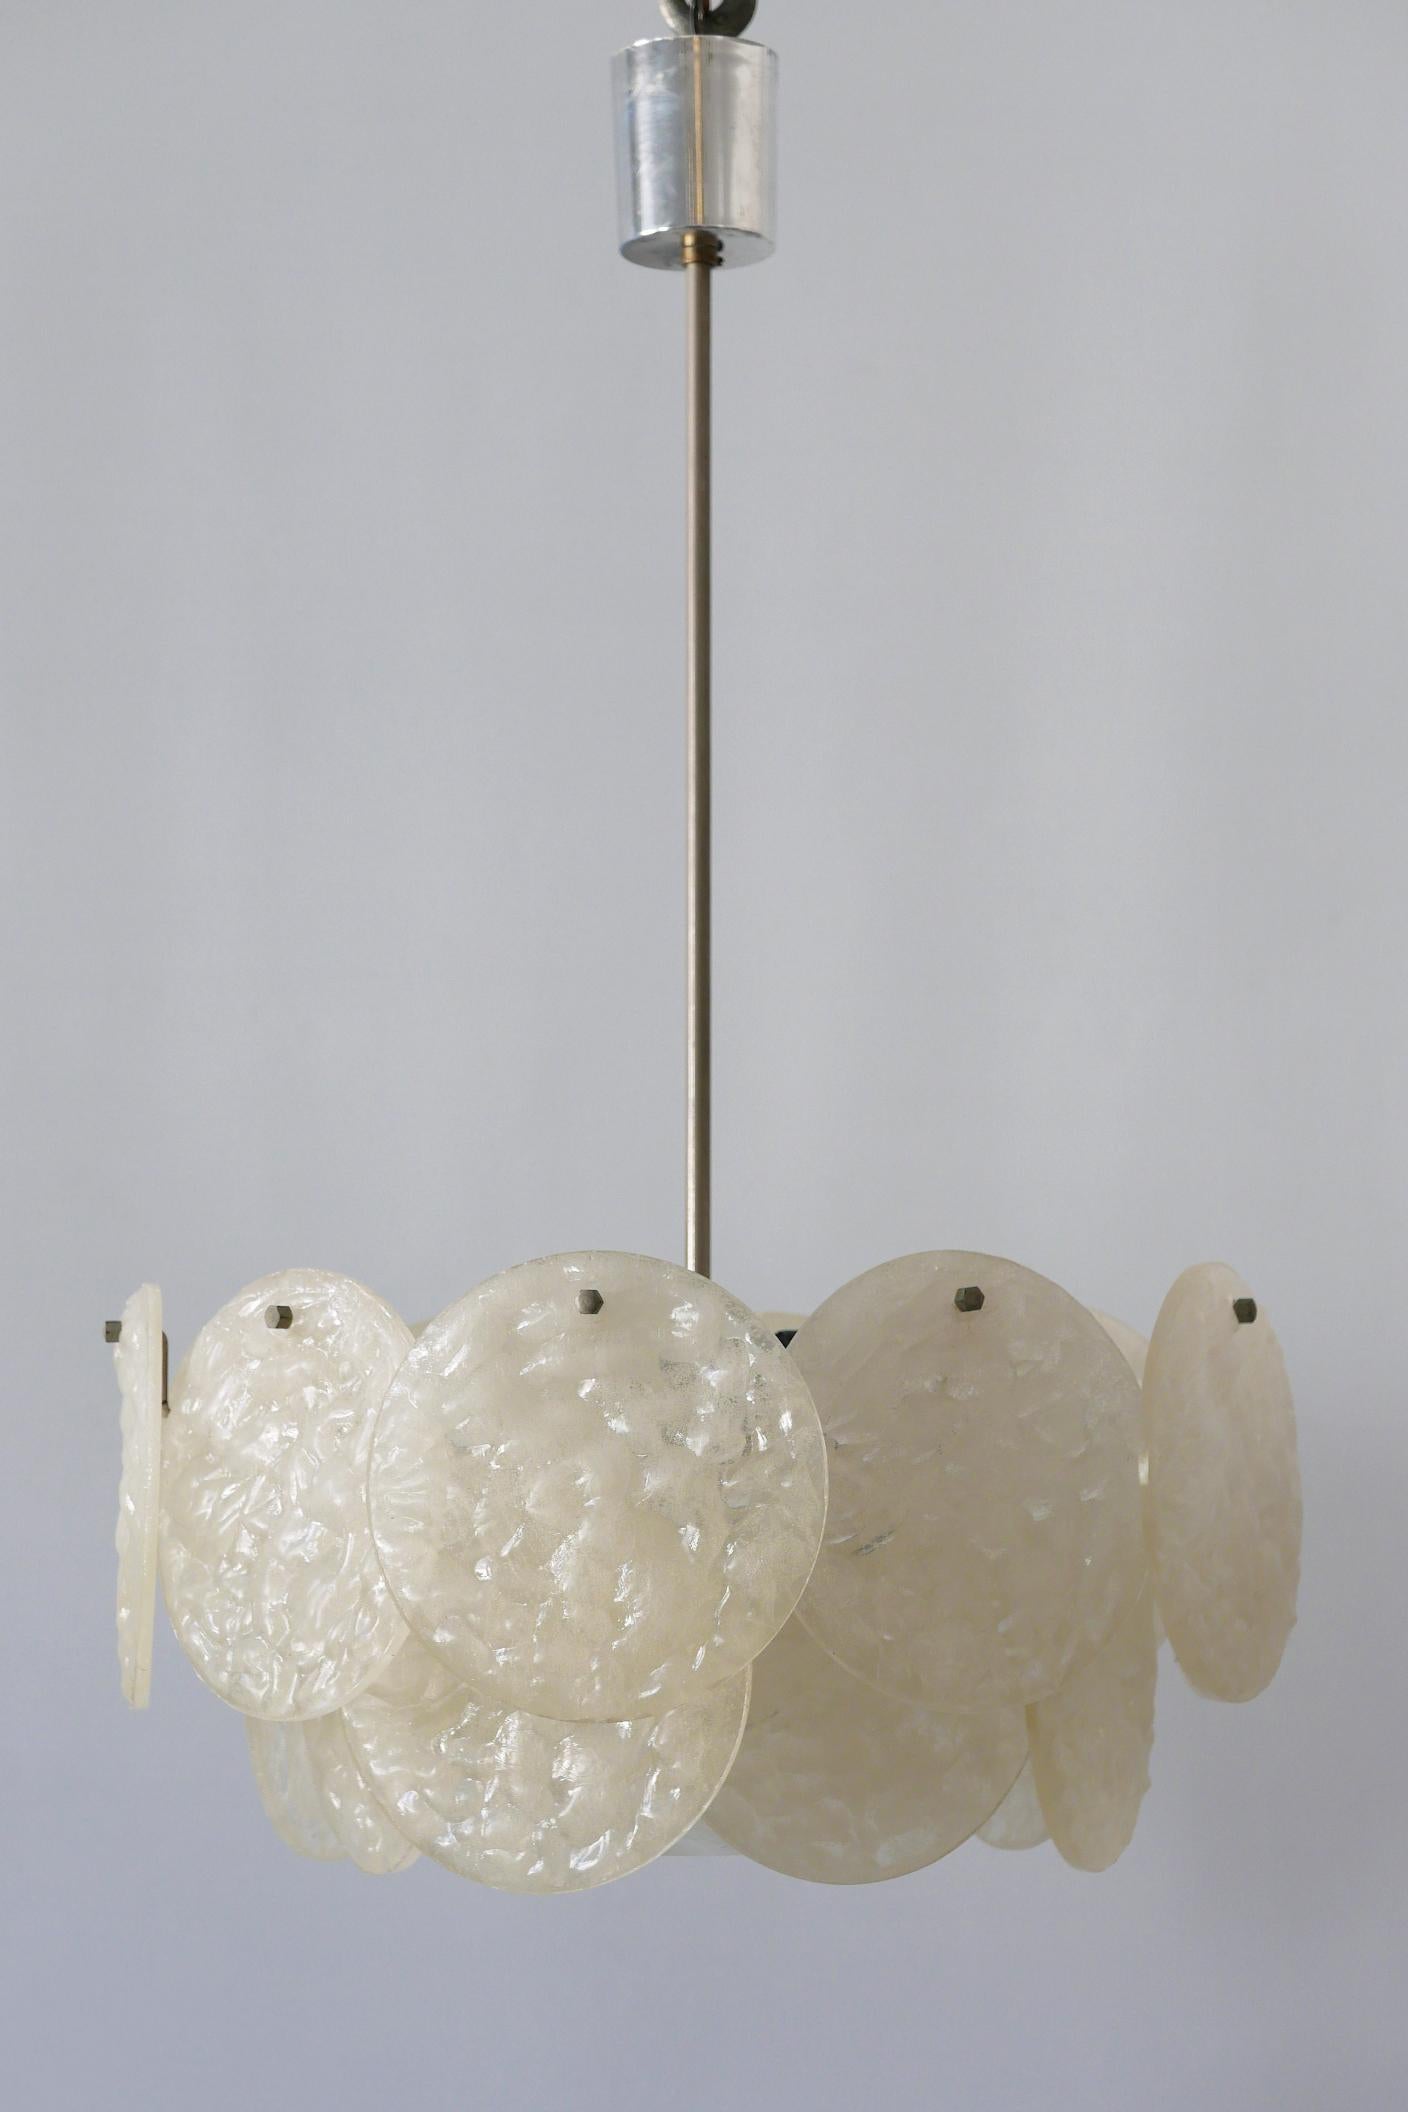 Mid-Century Modern Chandelier or Pendant Lamp with Textured Acrylic Discs, 1960s For Sale 1